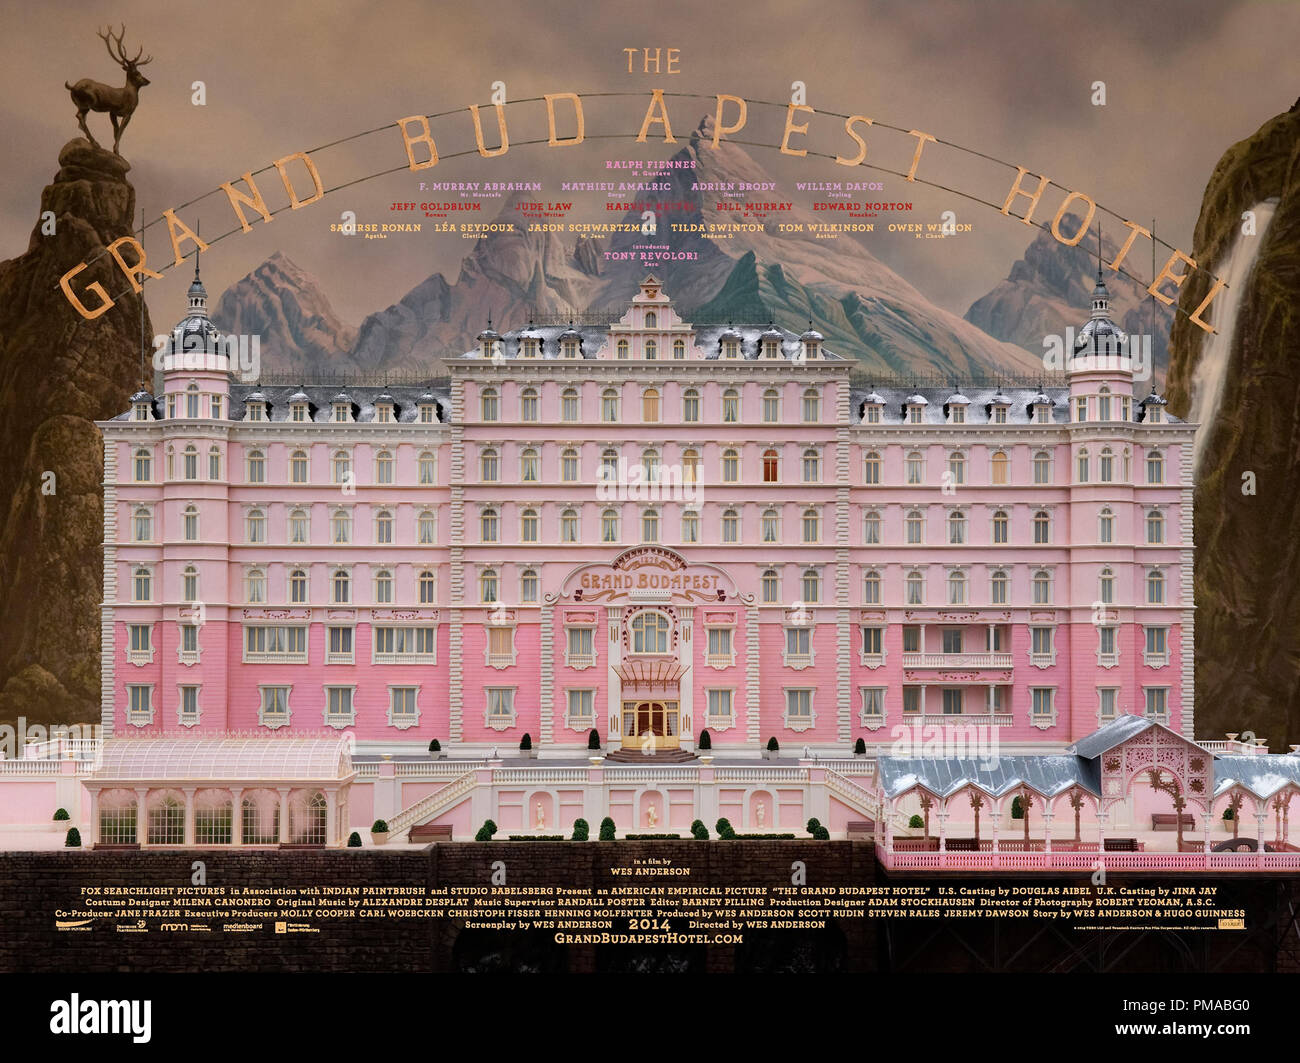 HOTEL POSTER, THE GRAND BUDAPEST HOTEL, 2014 Foto stock - Alamy